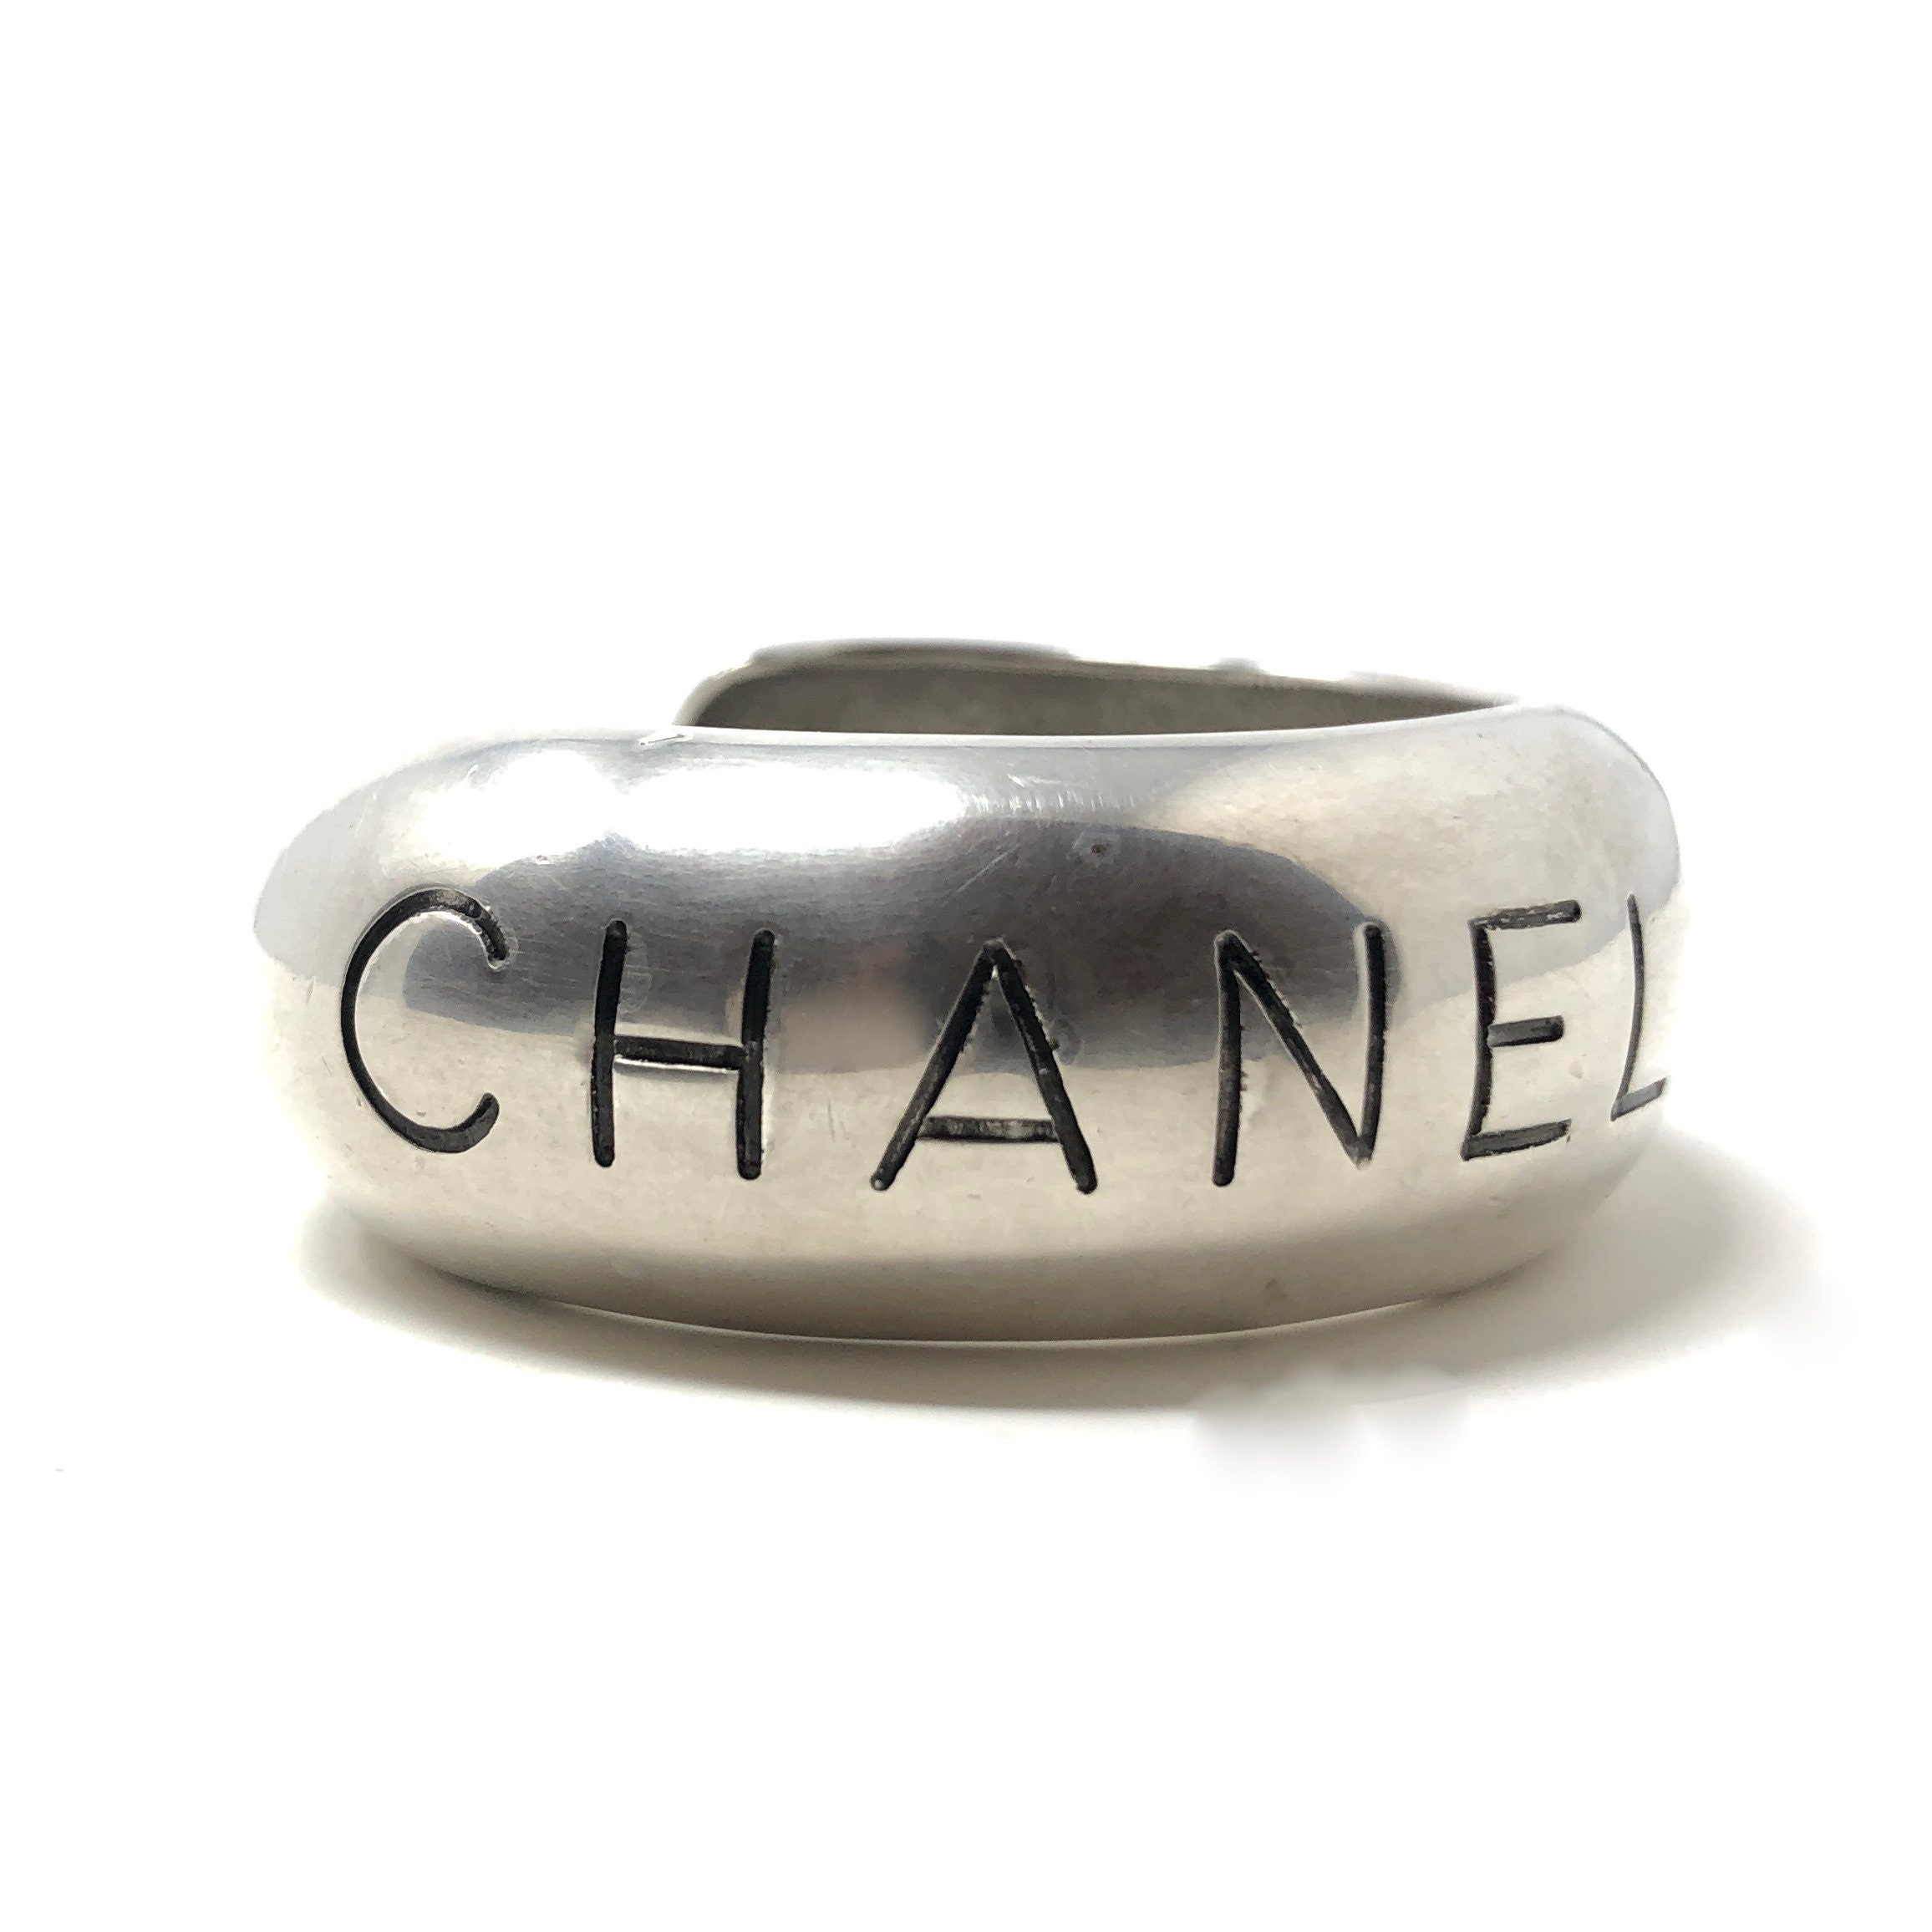 Chanel Style Ring -  Singapore